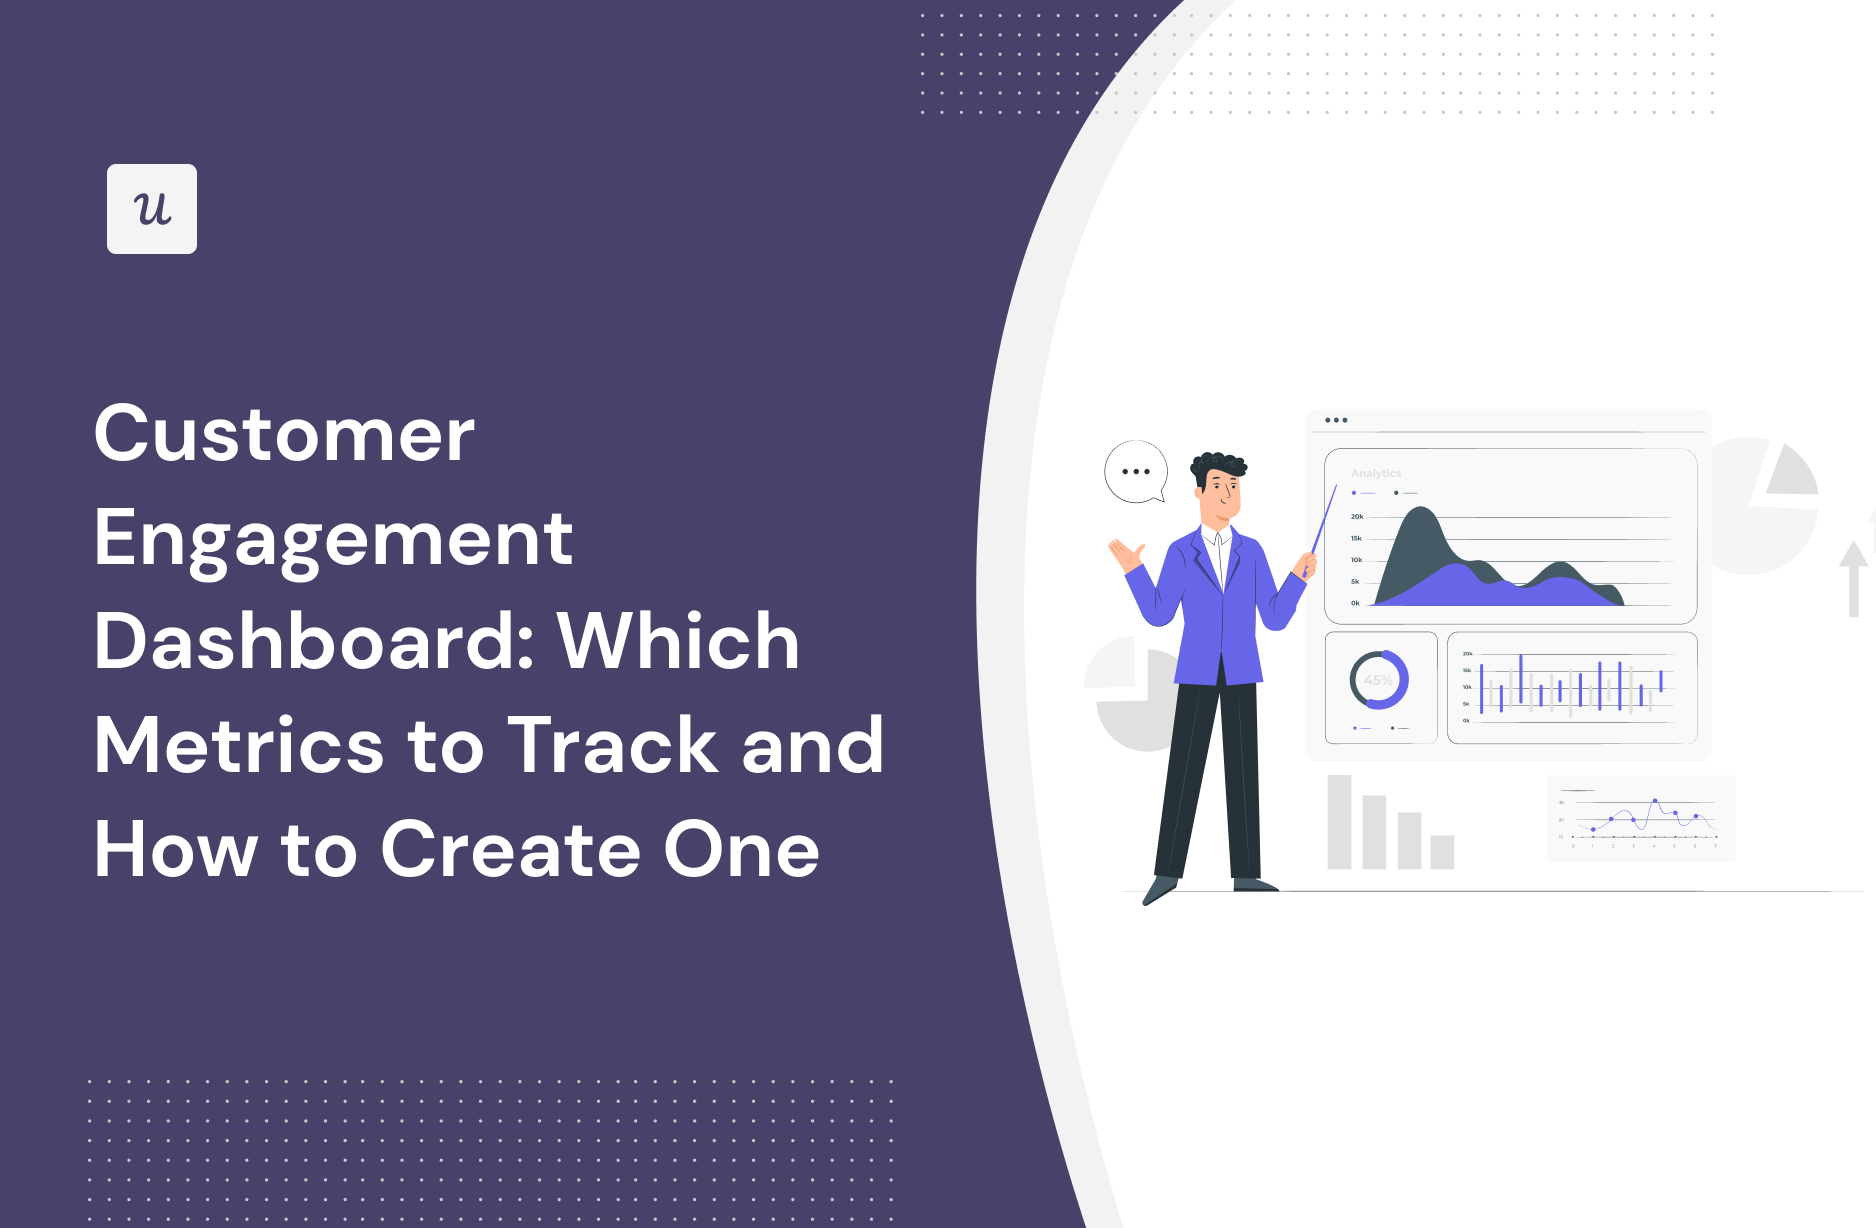 Customer Engagement Dashboard: Which Metrics to Track and How to Create One